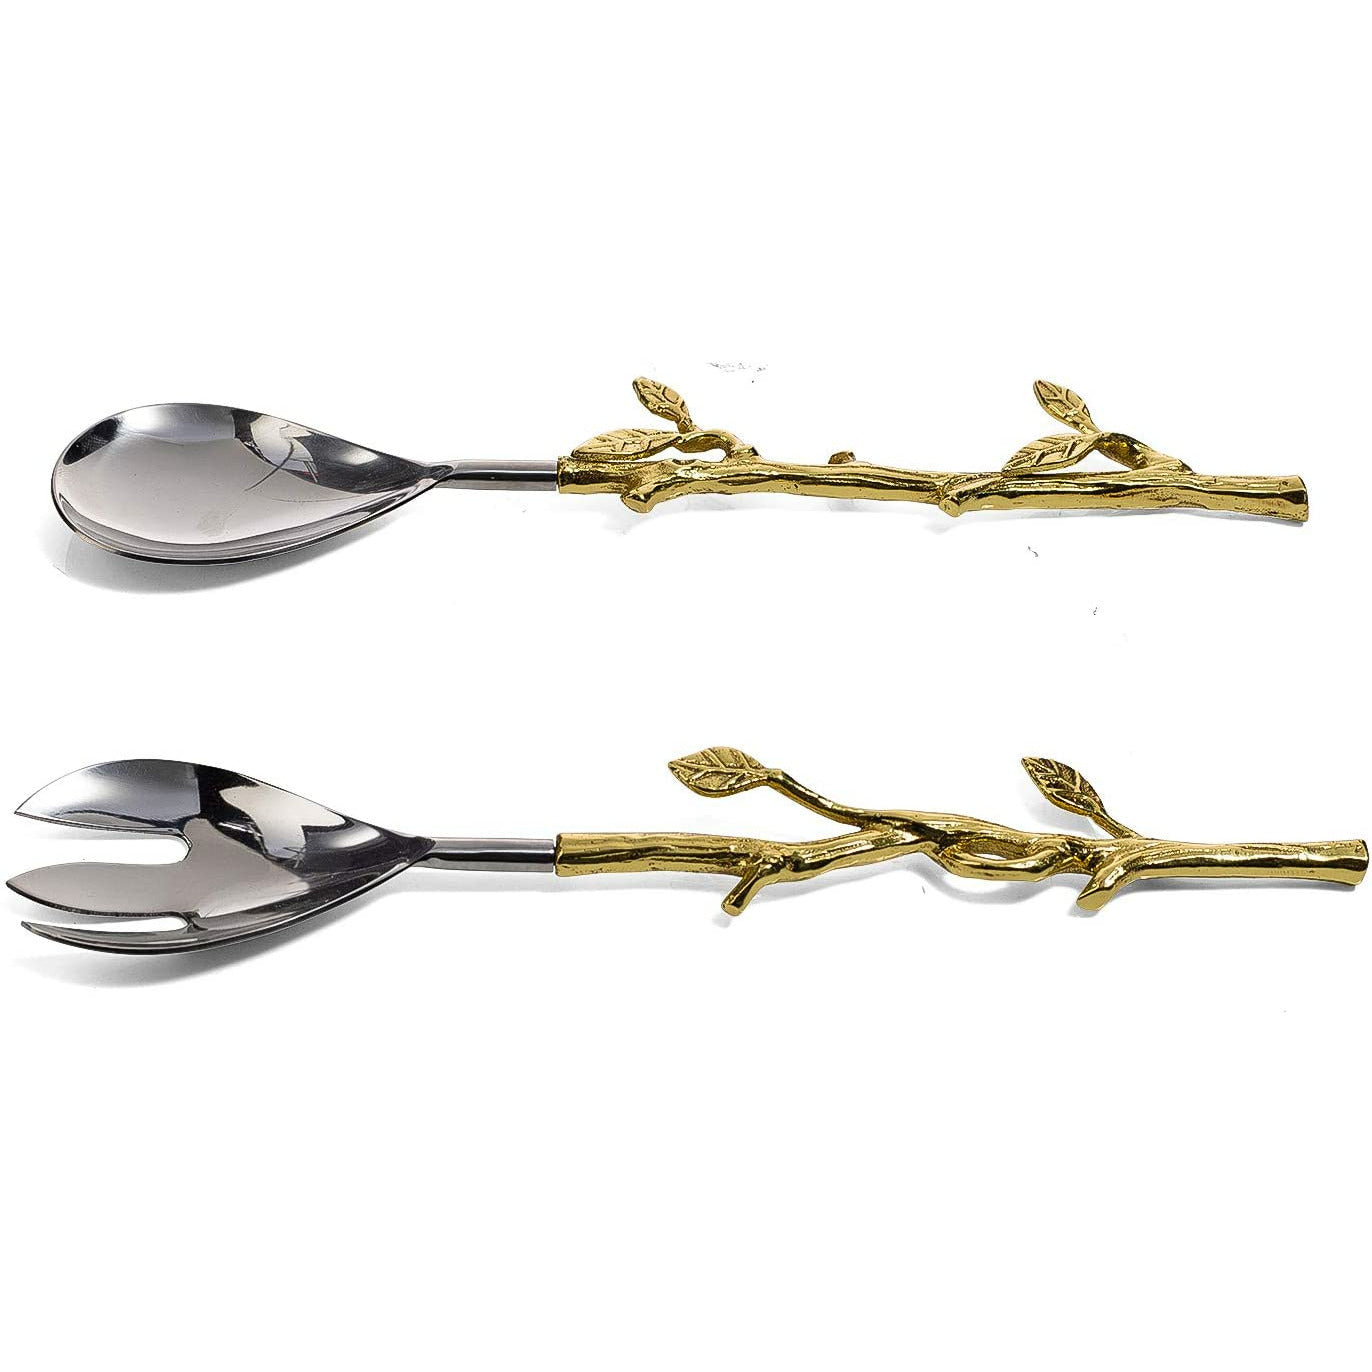 Gold Leaf Salad Servers Brass & Stainless Steel, Fork & Spoon Set Gold Leaf Design, Two Tone Ideal for Weddings, Party's, Elegant Events by Gute Decor